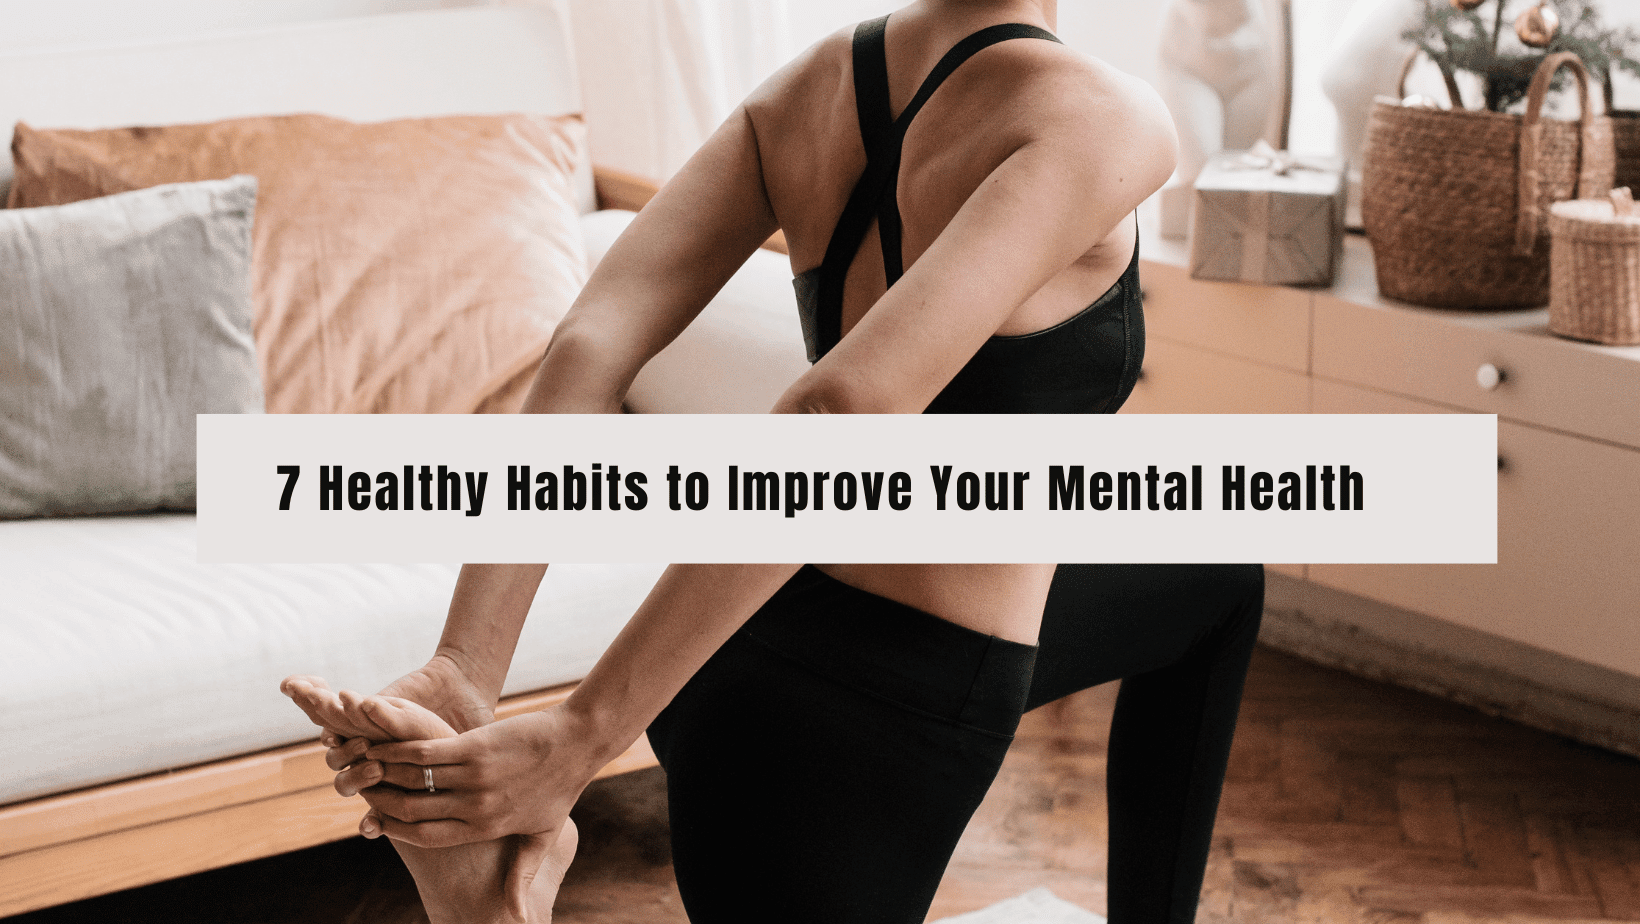 7 Healthy Habits to Improve Your Mental Health